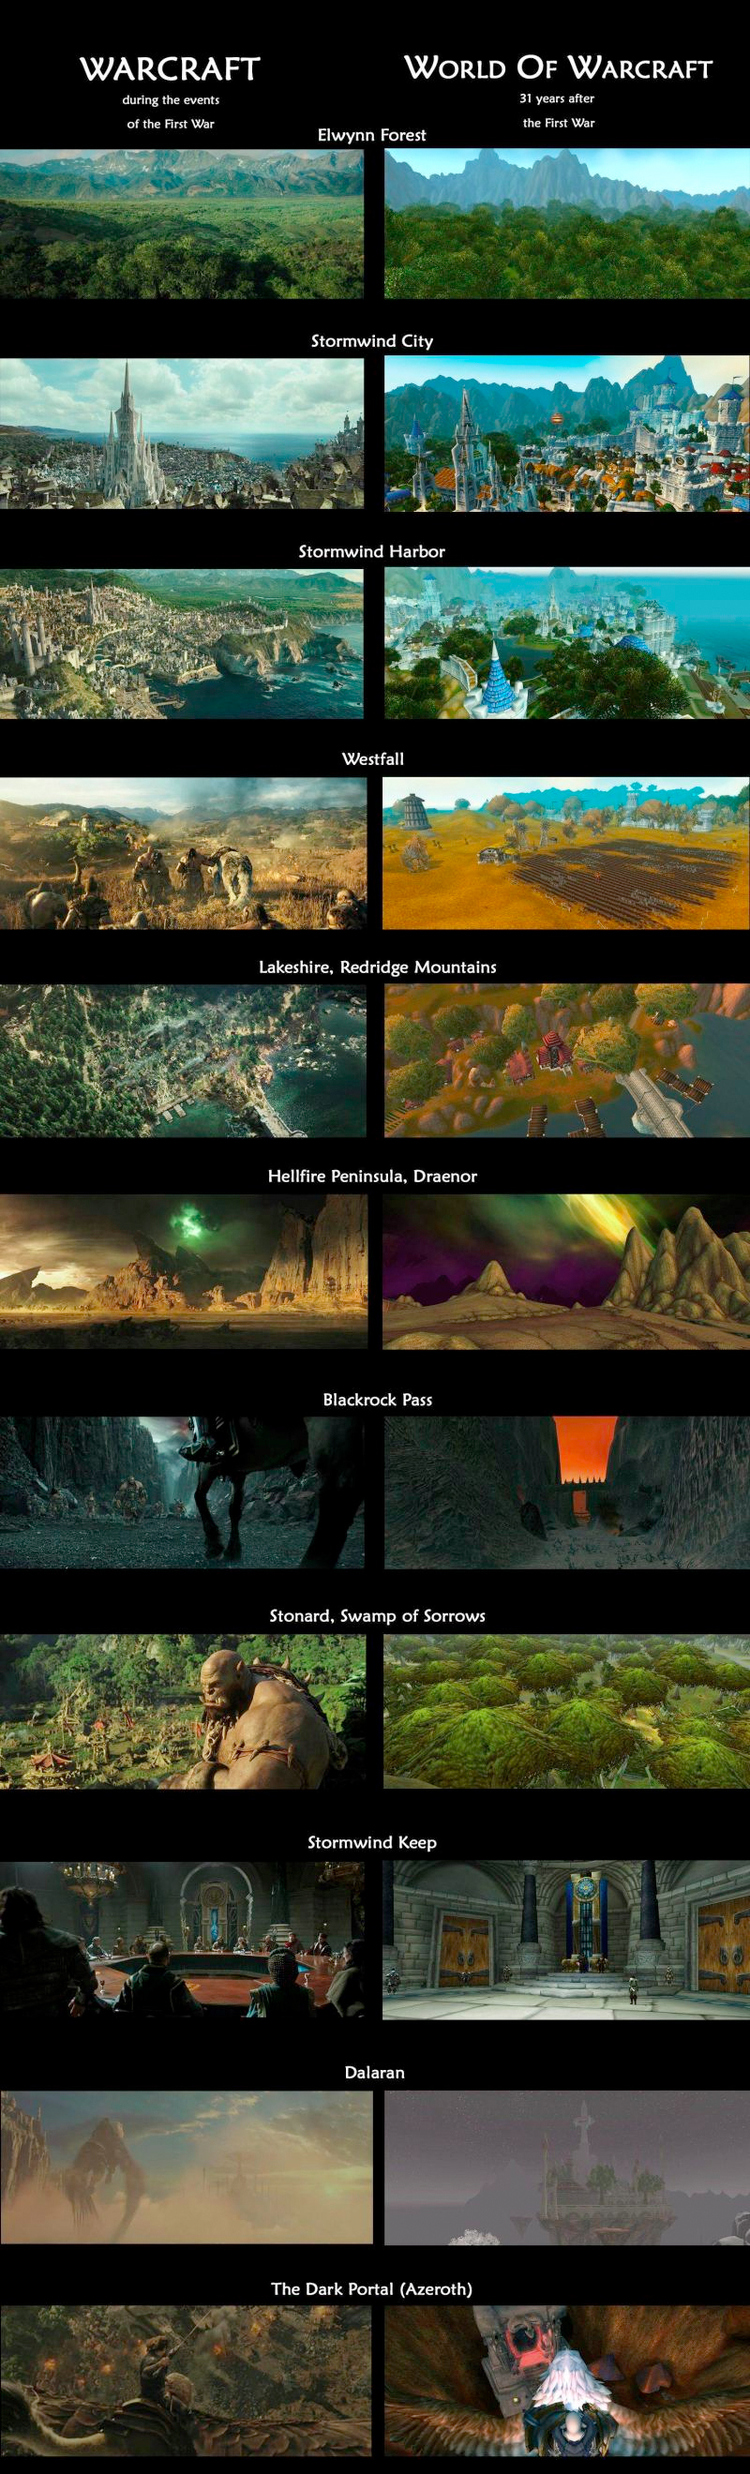 visual-comparisons-between-the-warcraft-movie-imagery-and-the-game